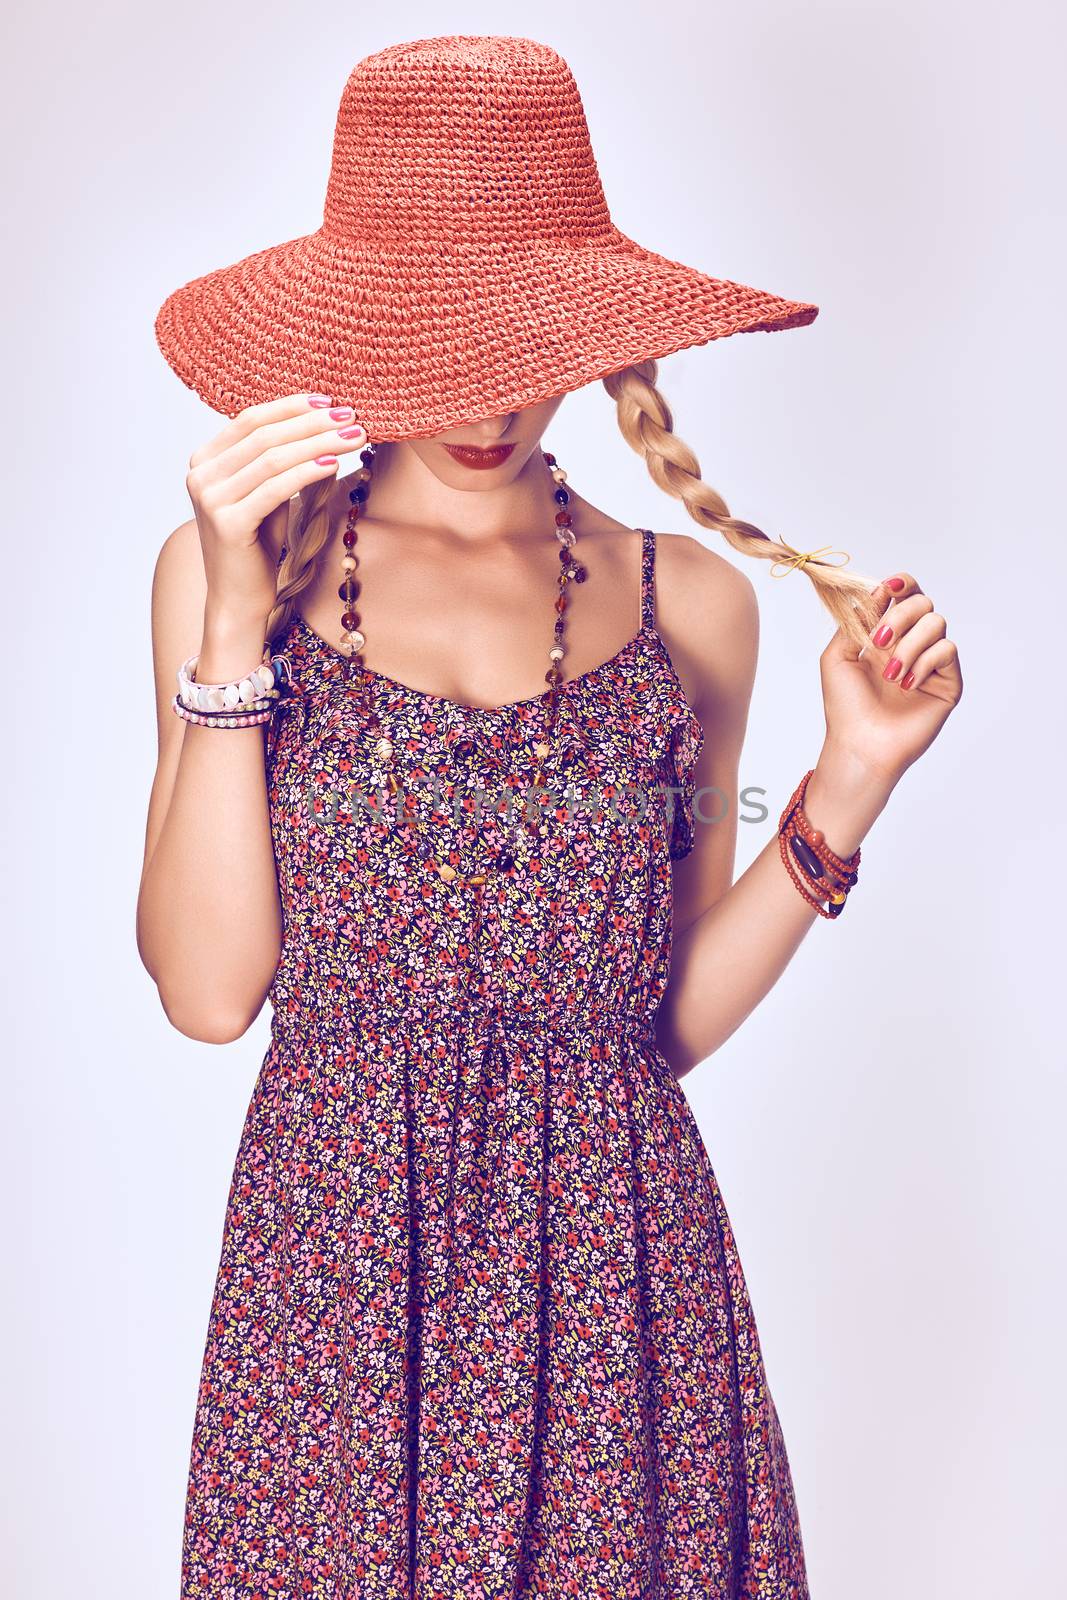 Hippie boho woman in hat. Beauty young playful positive blonde, pigtails, ethnic accessories relax, having fun. Floral sundress, romantic style. Attractive loving girl. Unusual creative,people